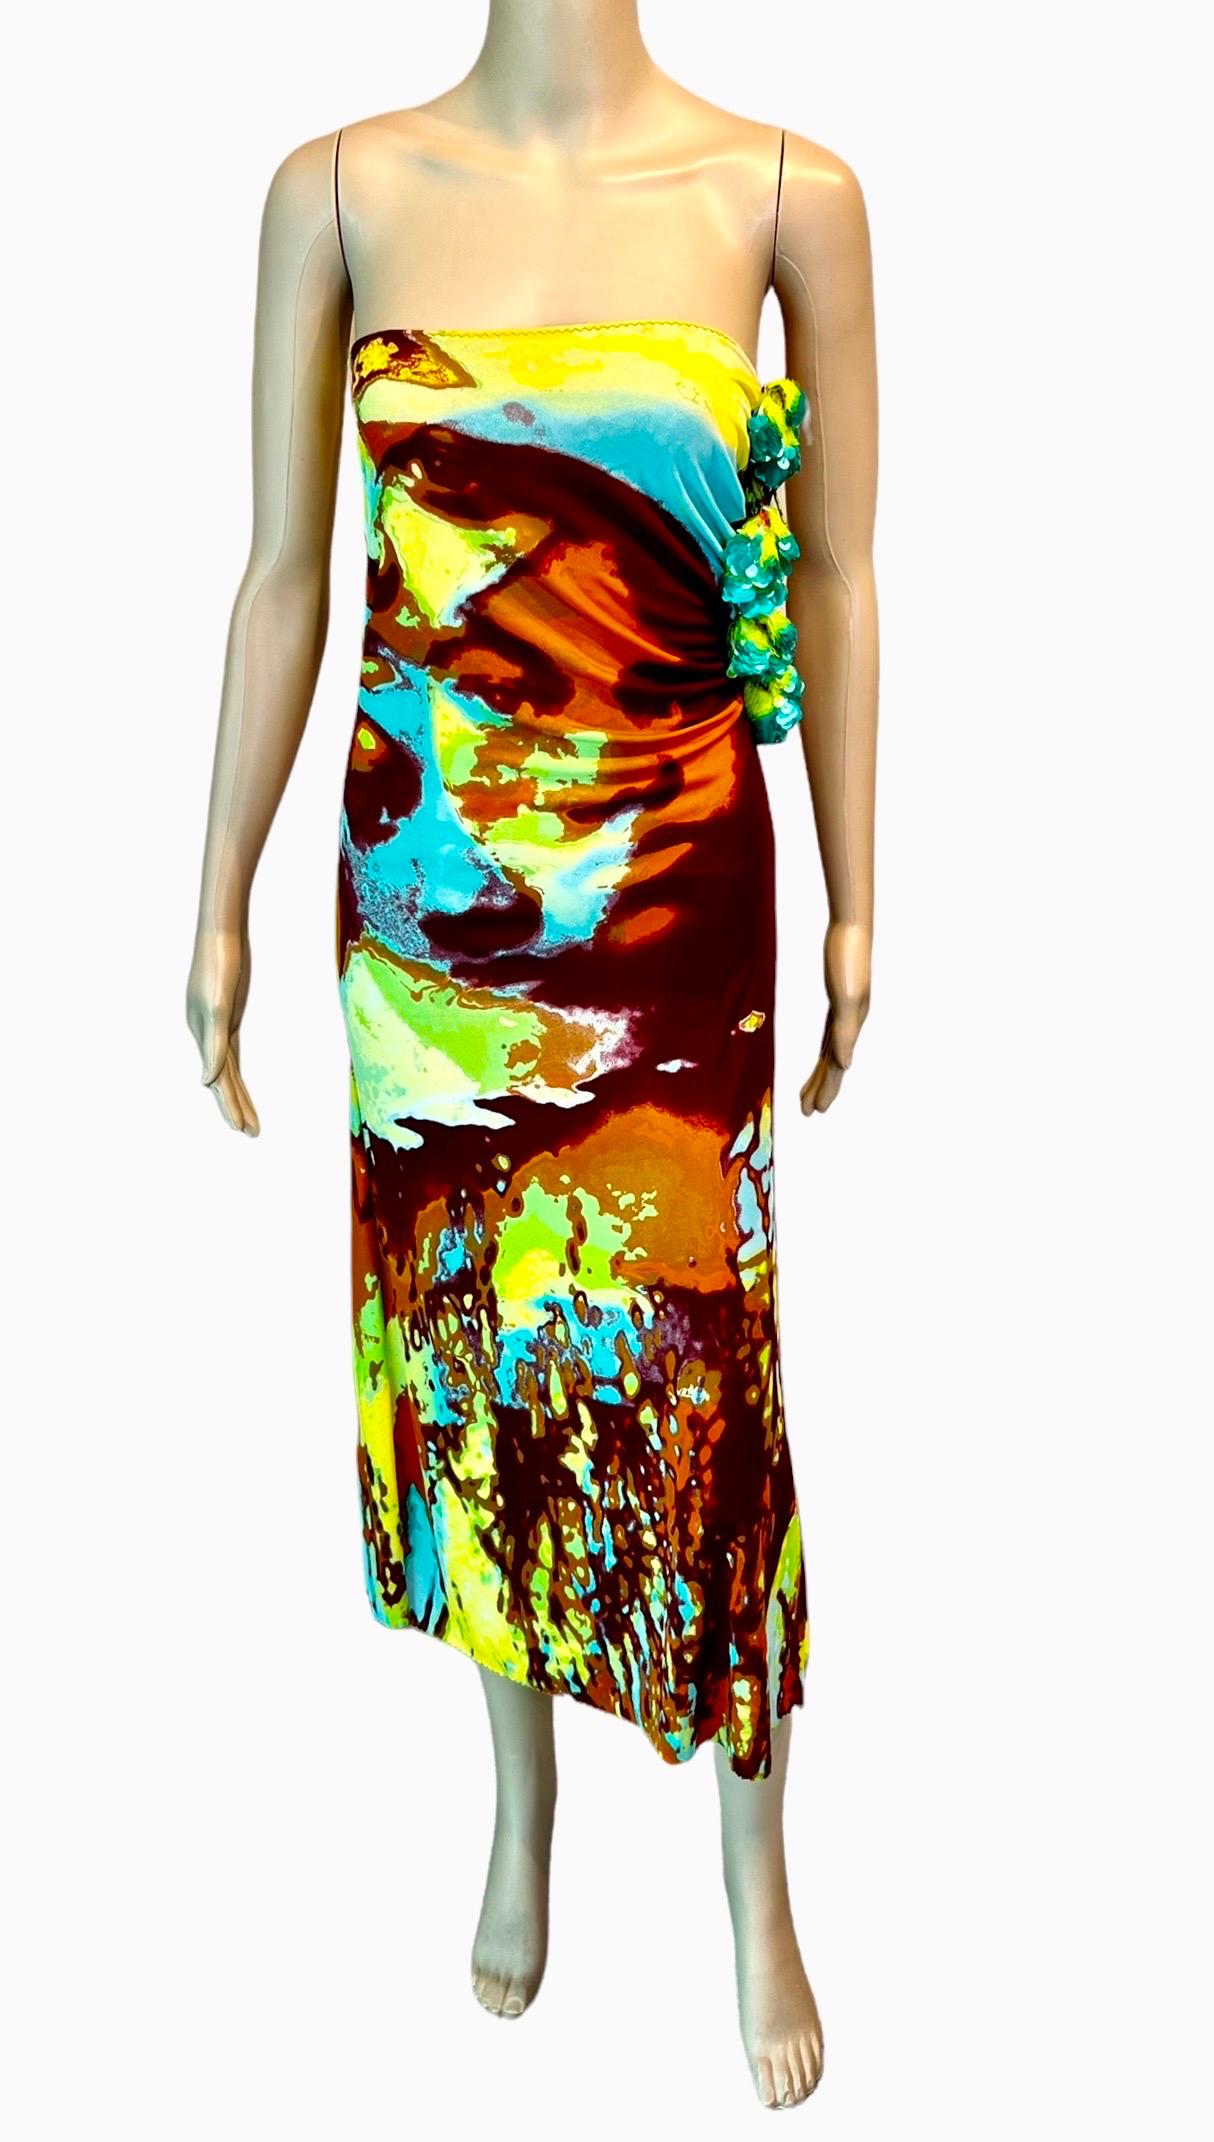 Jean Paul Gaultier S/S 2000 Embellished Psychedelic Print Maxi Skirt Dress  For Sale 1